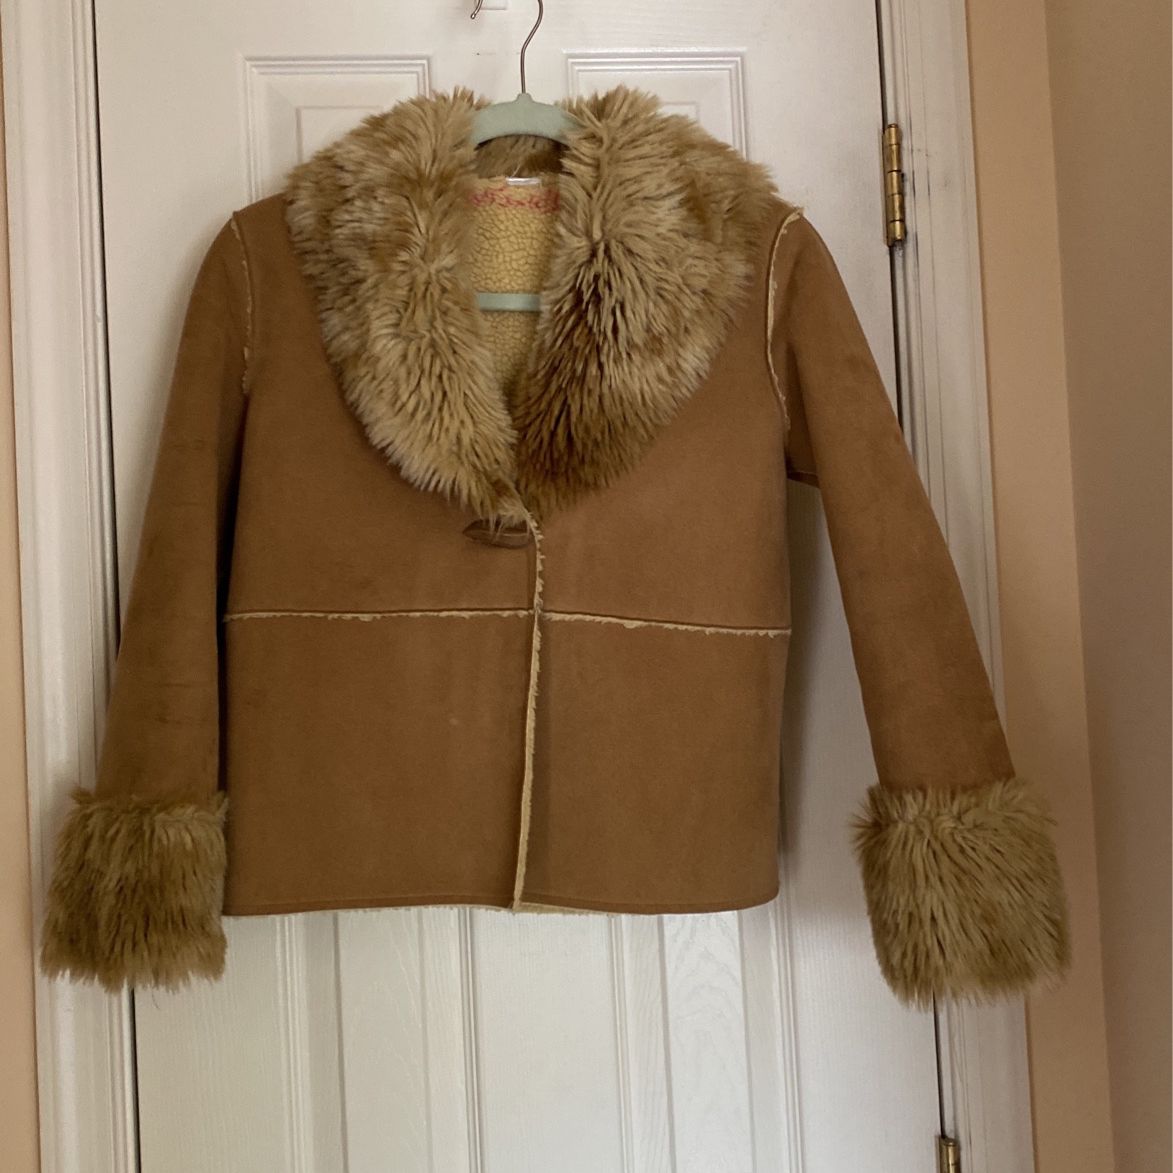 Suede Jacket With Sherpa Lining Size Girls 10-12